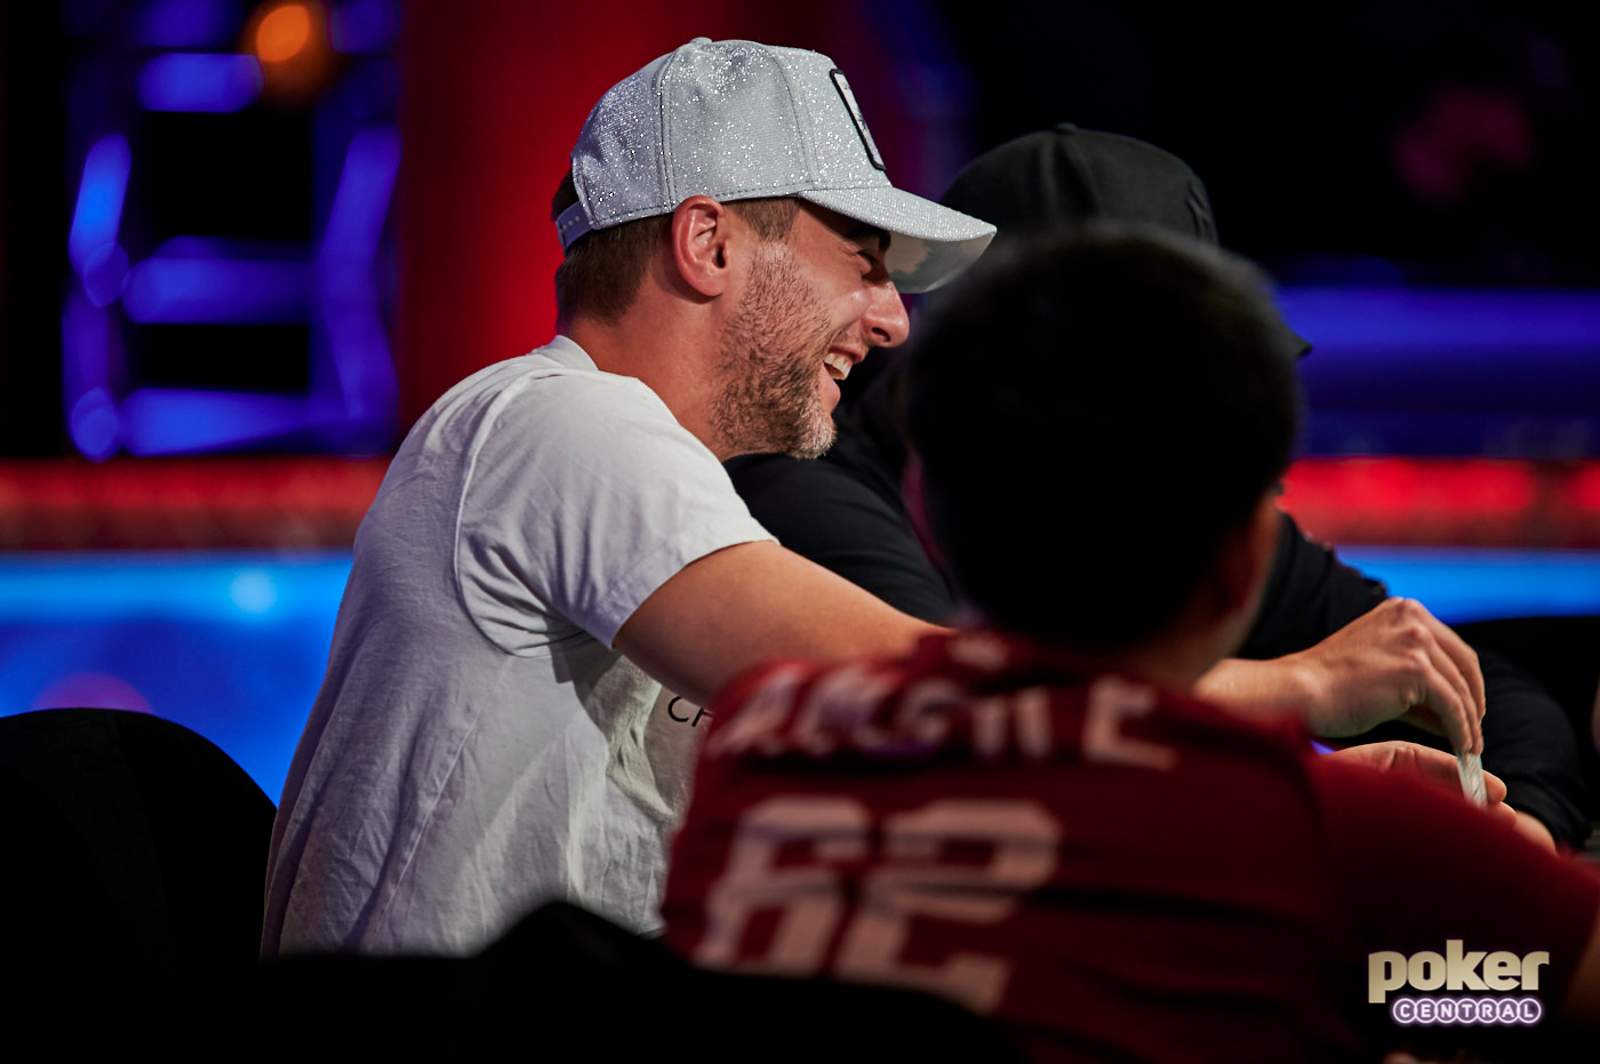 Polk Ready for 2019 WSOP Debut, Lucky Chance, and Hallaert Hates the Chips